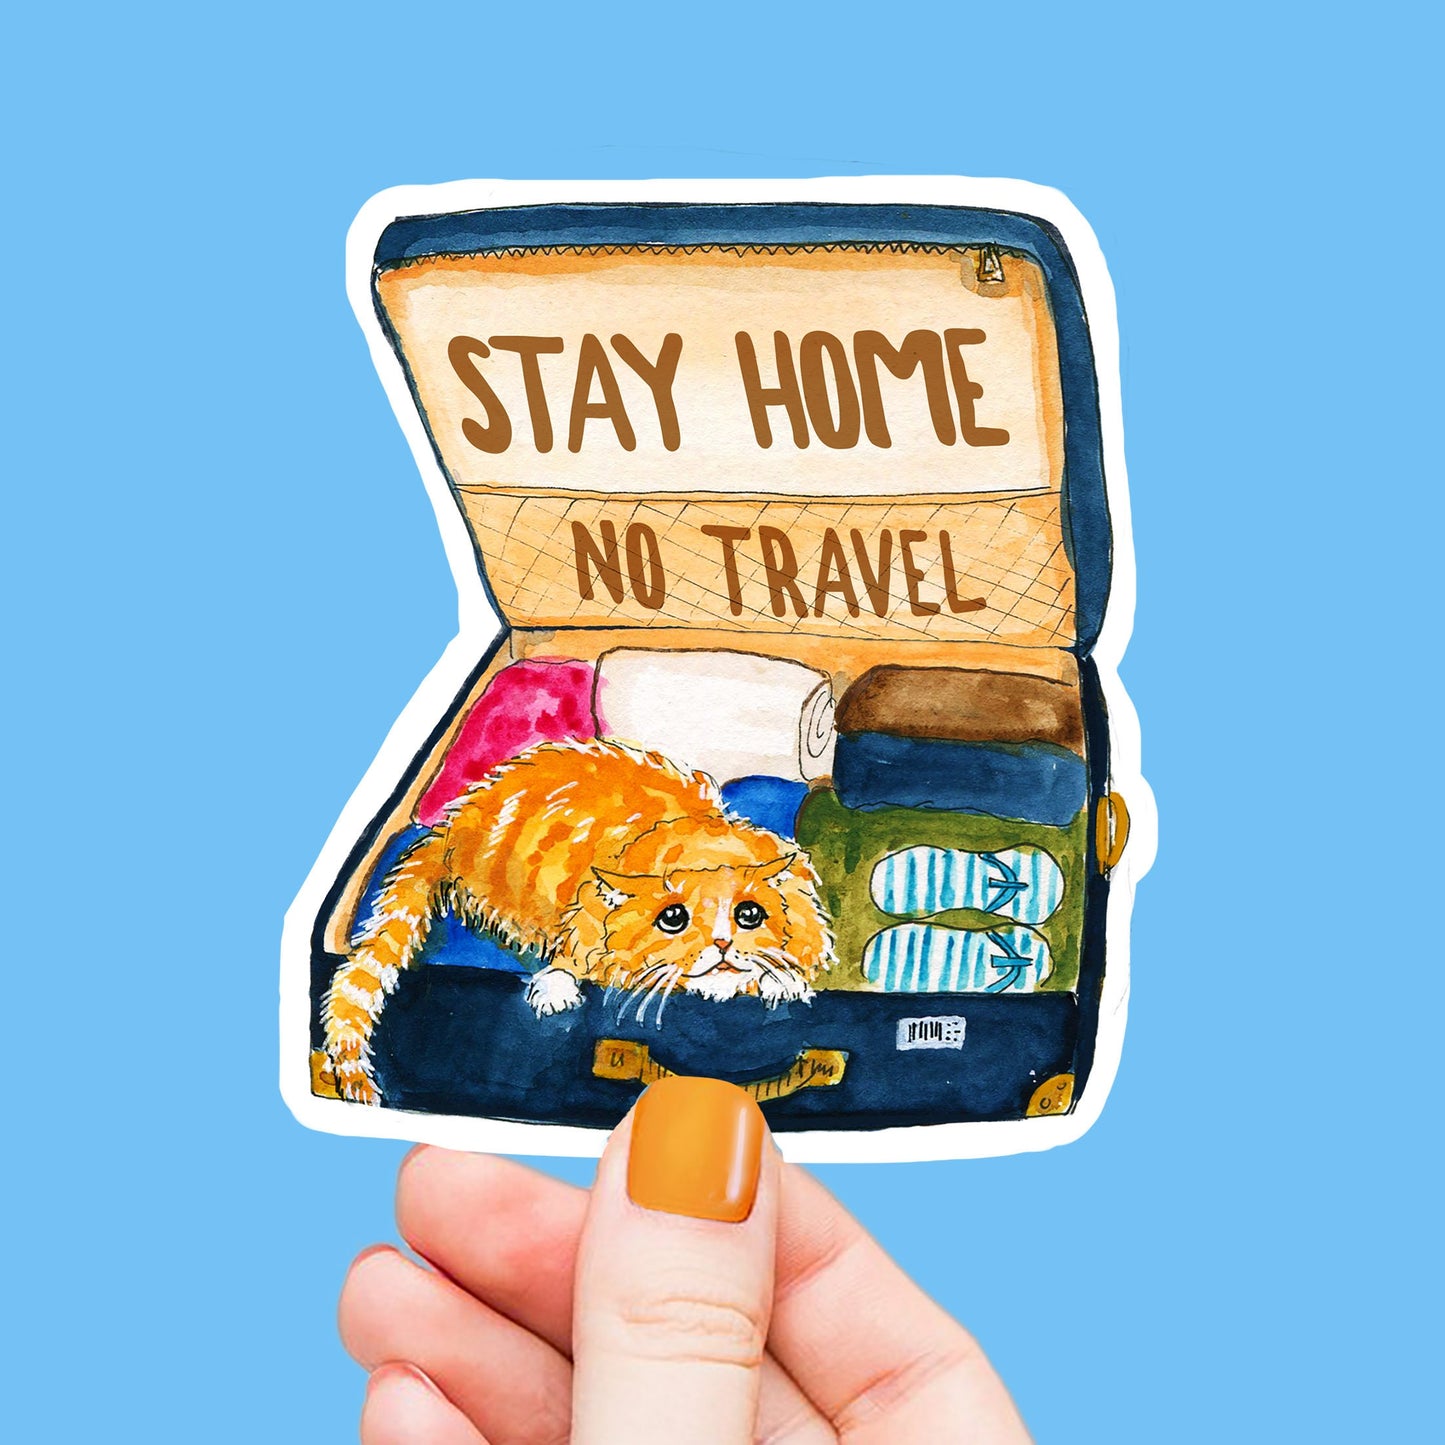 Stay Home Introvert Cat Sticker For Cat Lover - No Travel Indoor Pet Vinyl Sticker For Introverts - Liyana Studio